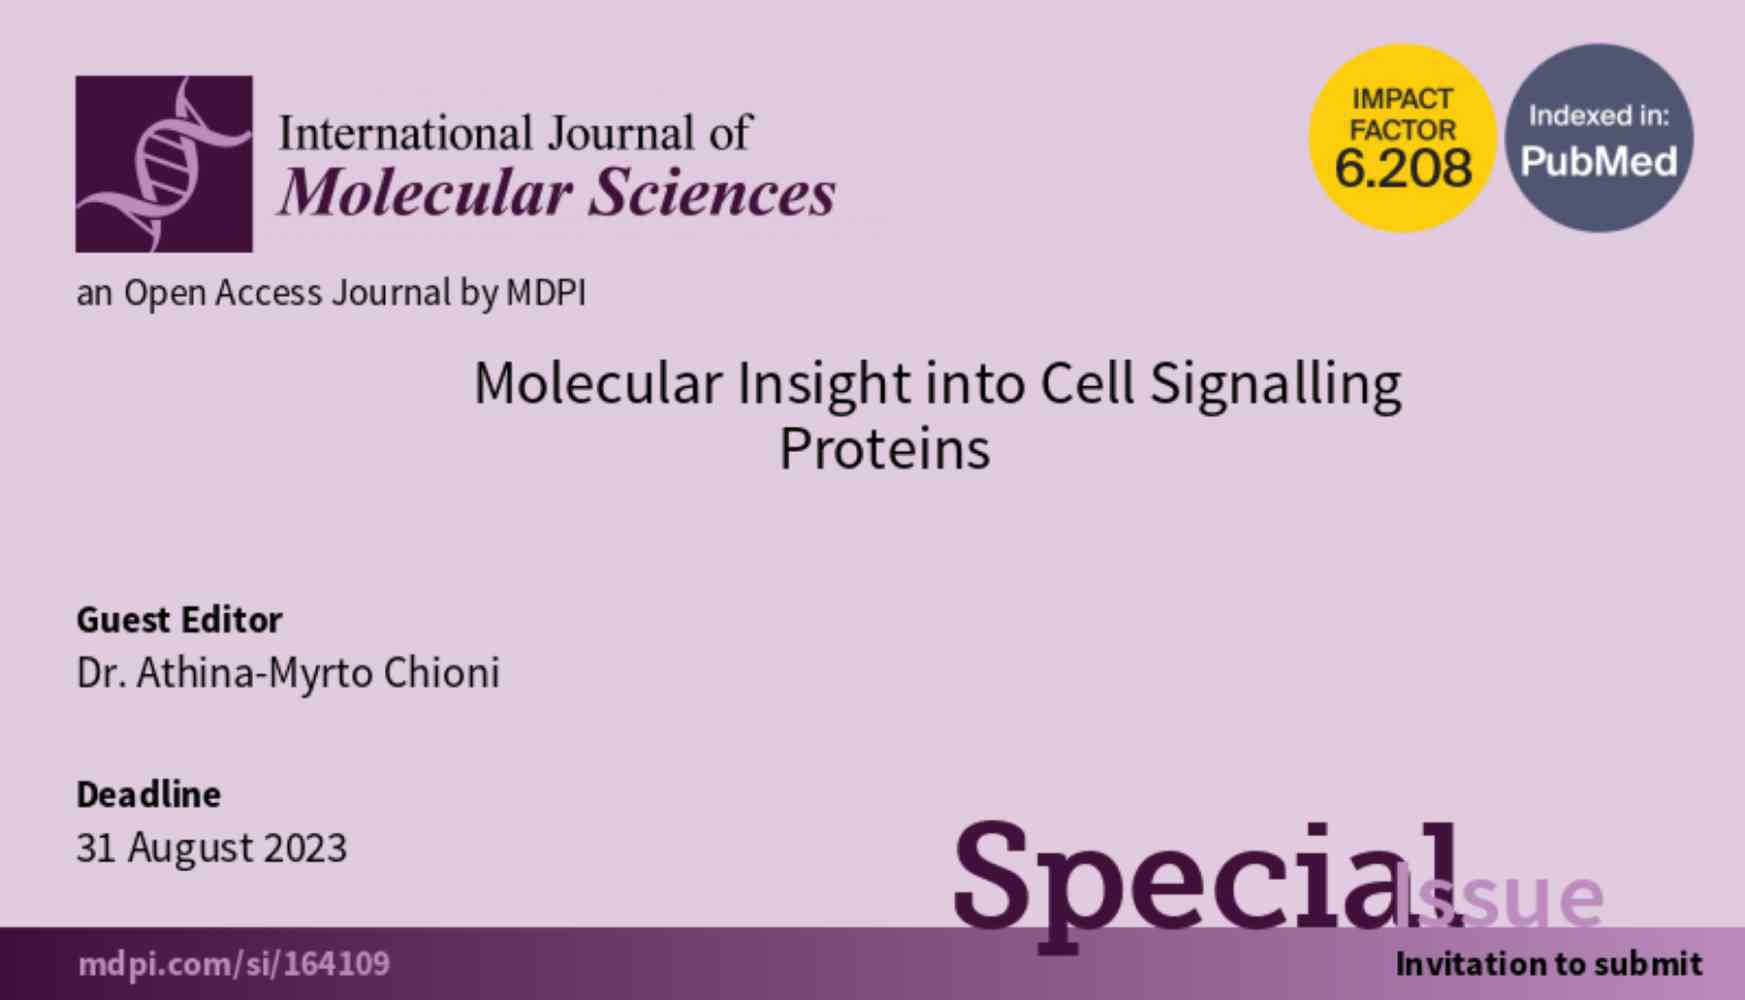 Guest Editor for a Special Issue in IJMS - "Molecular Insight into Cell Signalling Proteins"